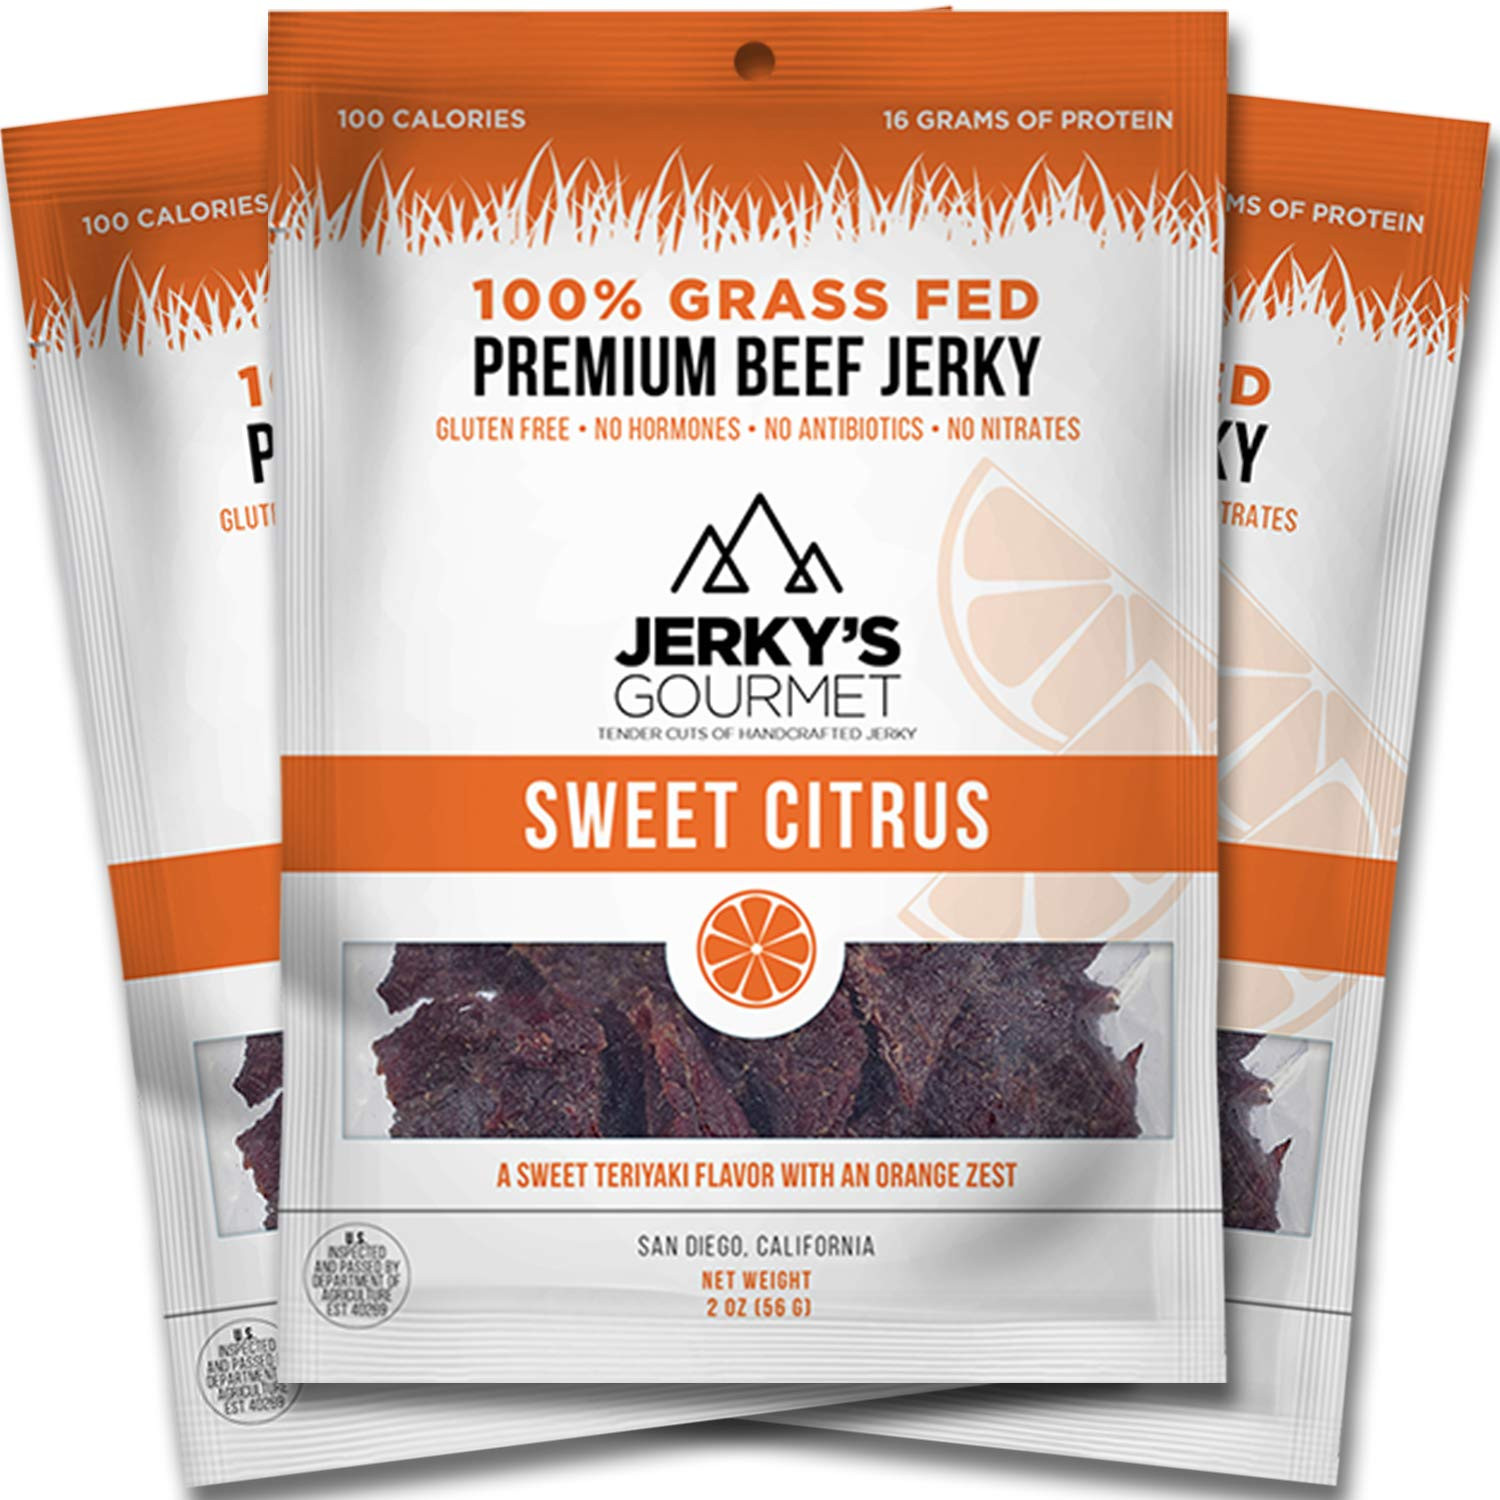 100 Calorie Low Carb Snacks
 Amazon Black Pepper Grass Fed Beef Jerky 100